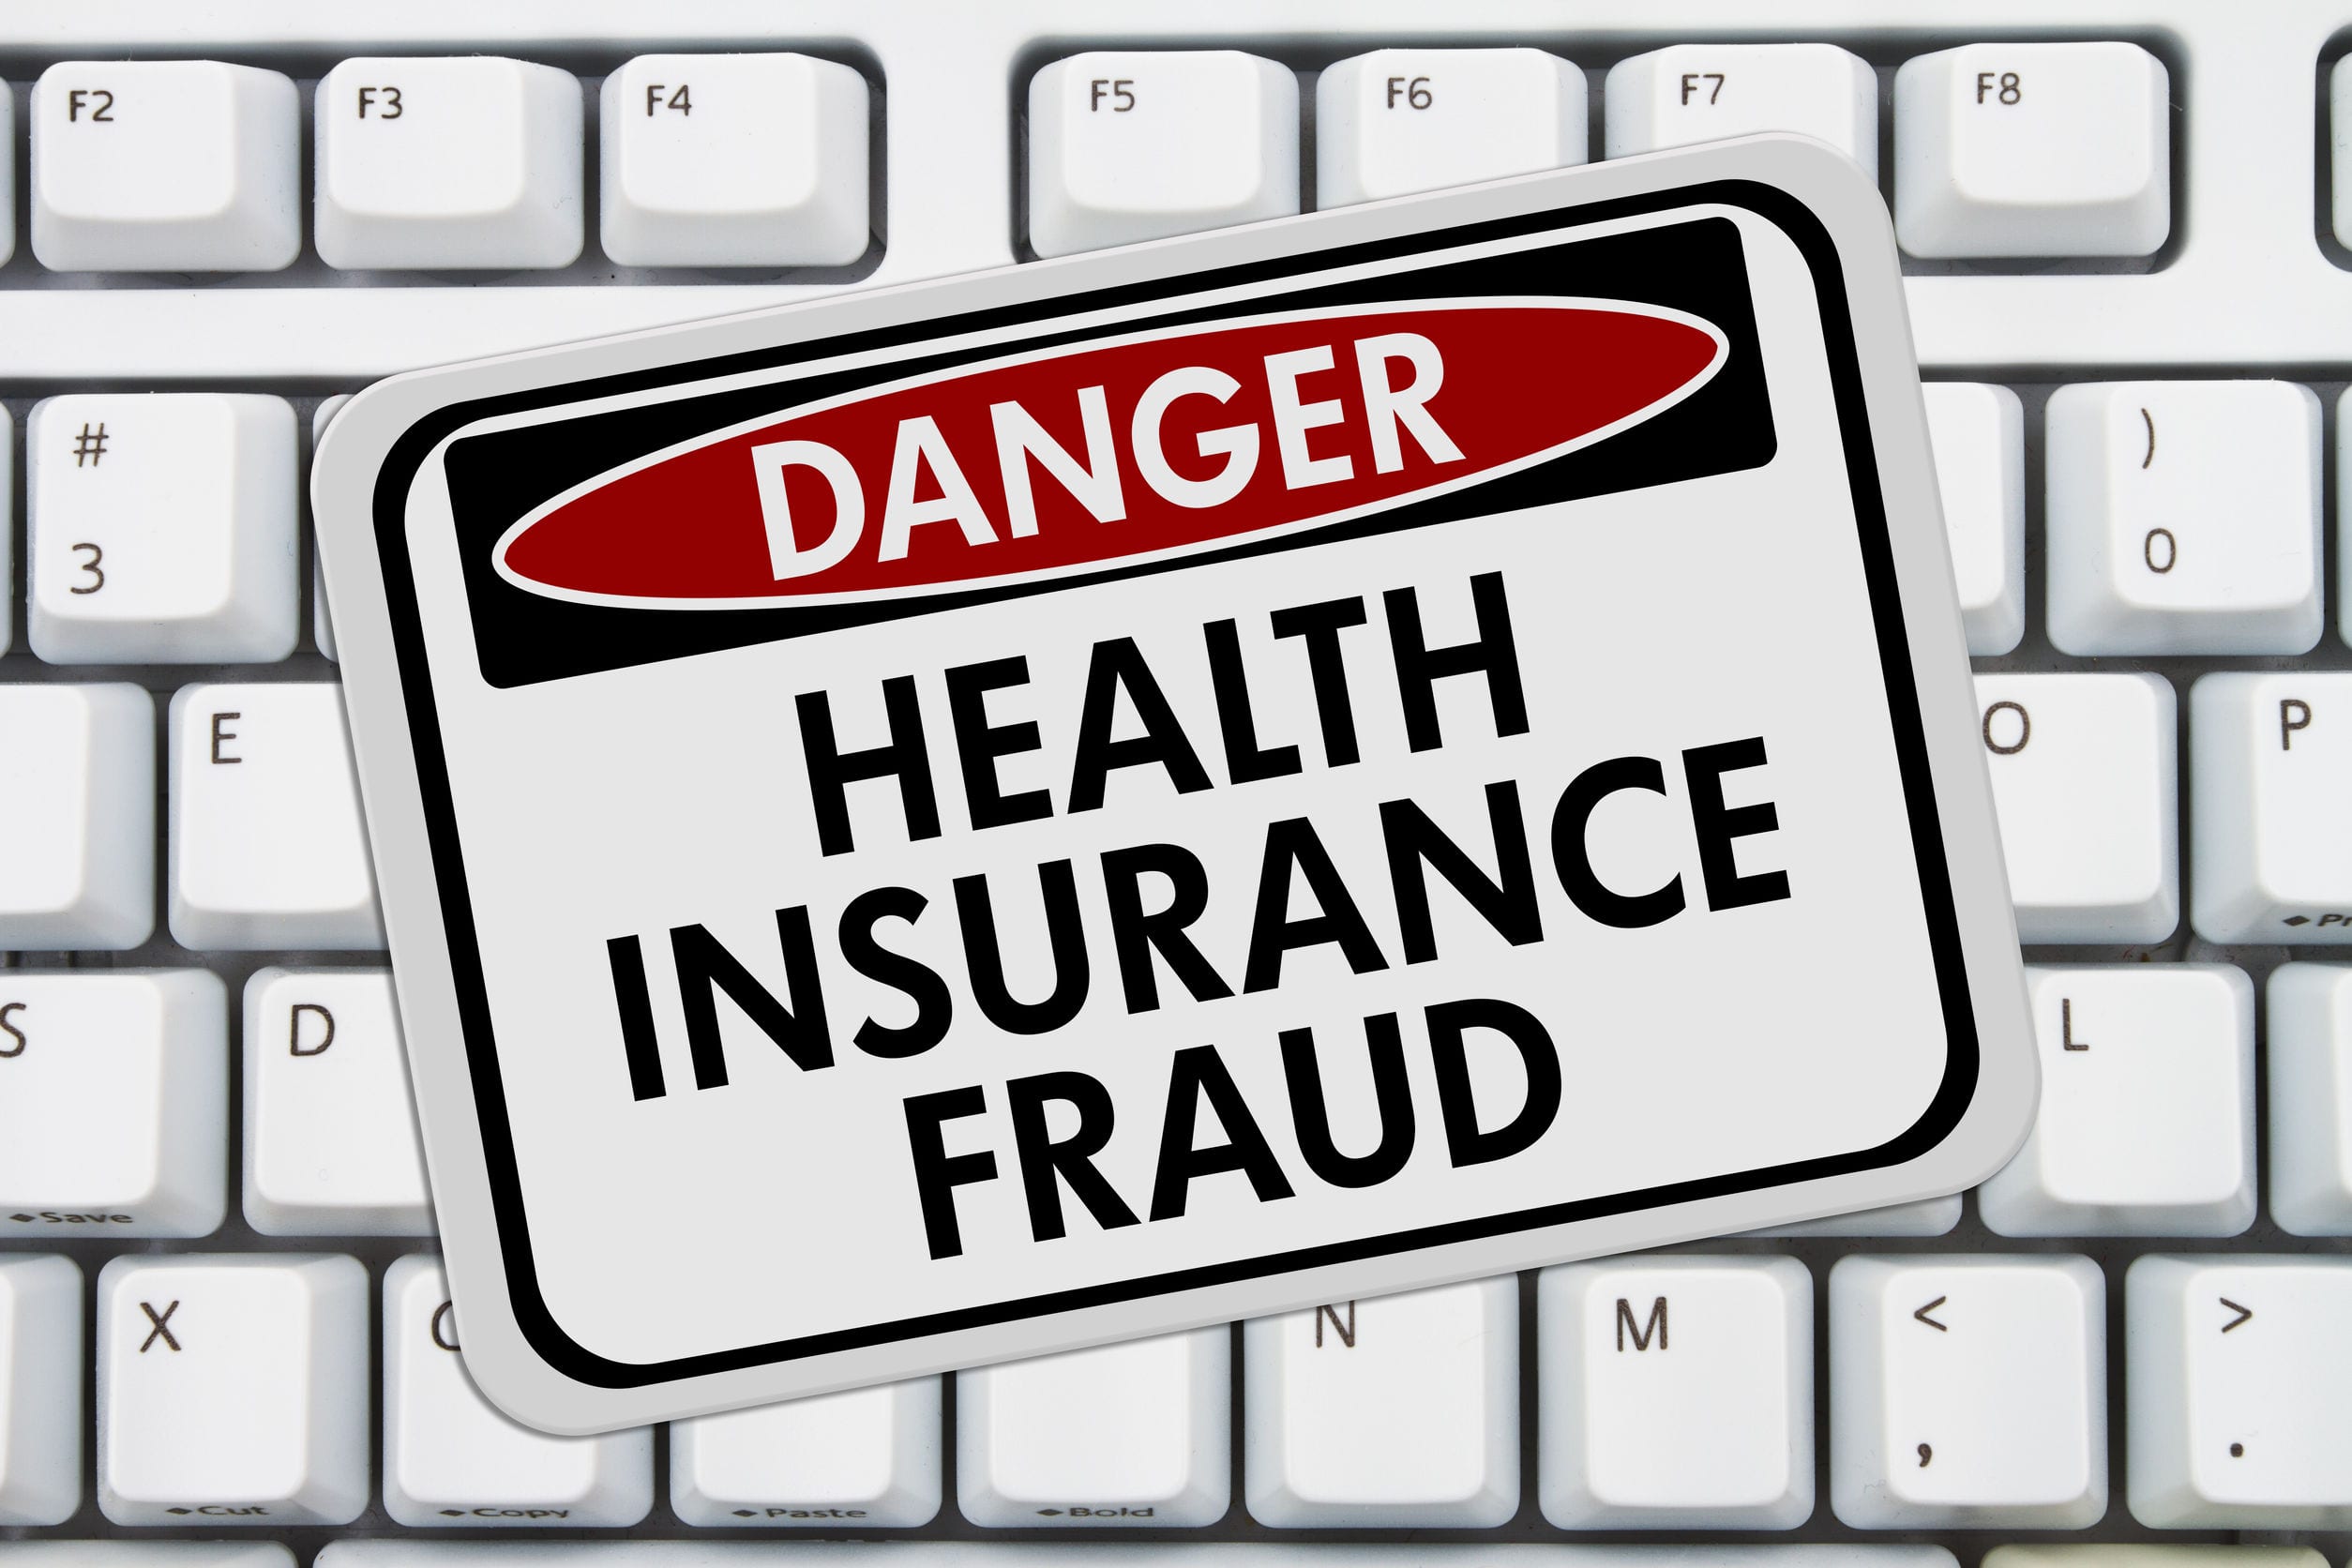 Chicago Health Care Insurance Fraud Lawyer